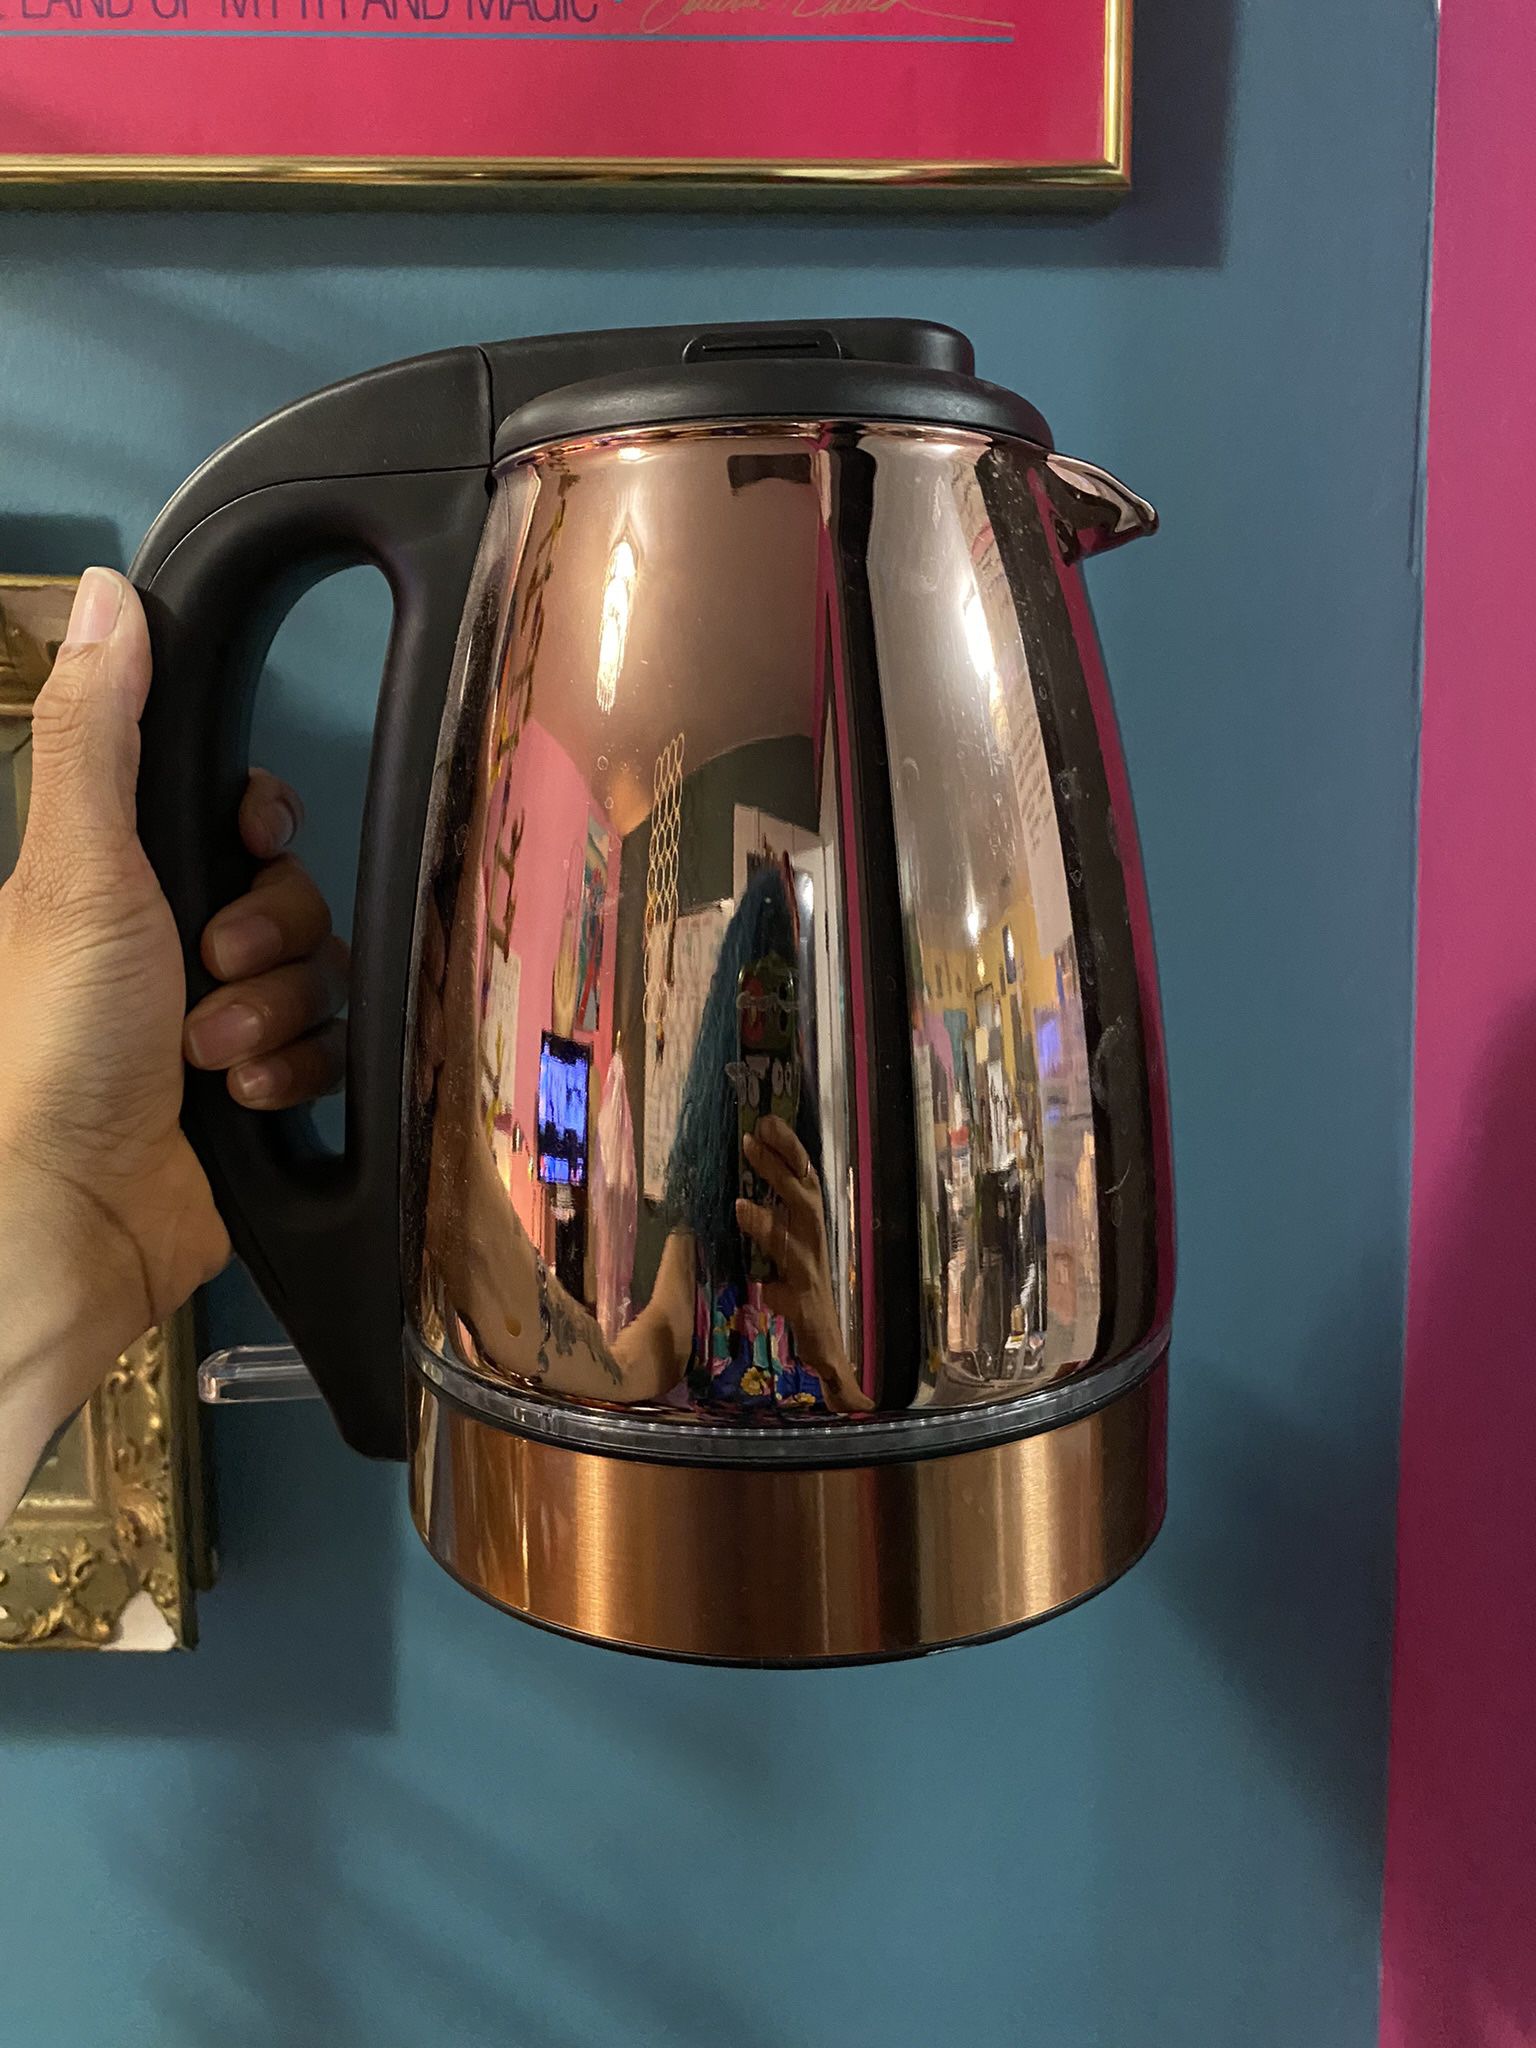 KRUPS electric kettle bw 7008 almost new very good condition used for Sale  in Hollywood, FL - OfferUp